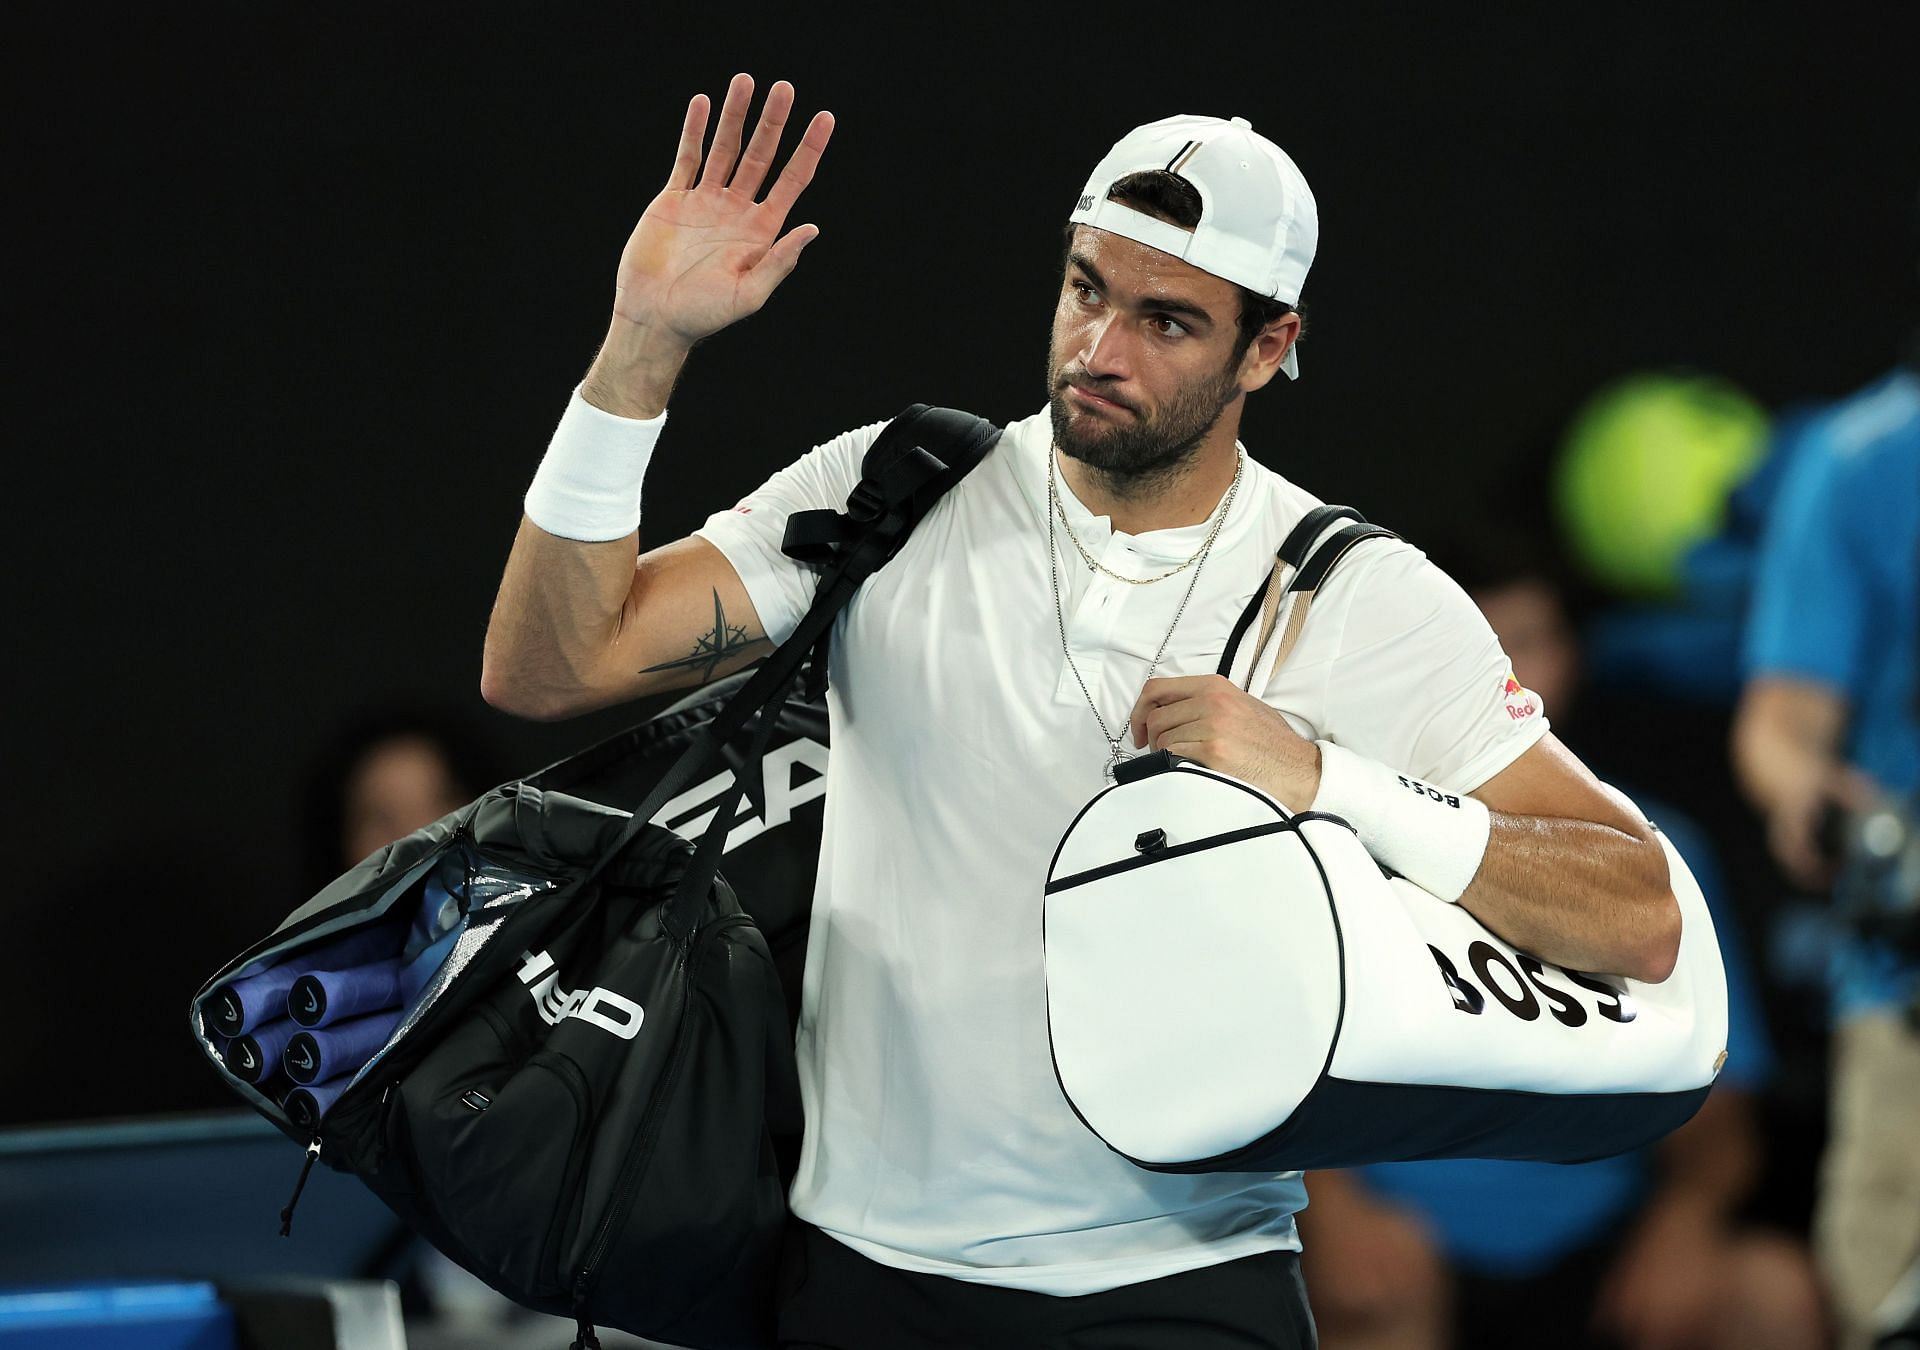 Berrettini waves to the crowd after his 2023 Australian Open exit